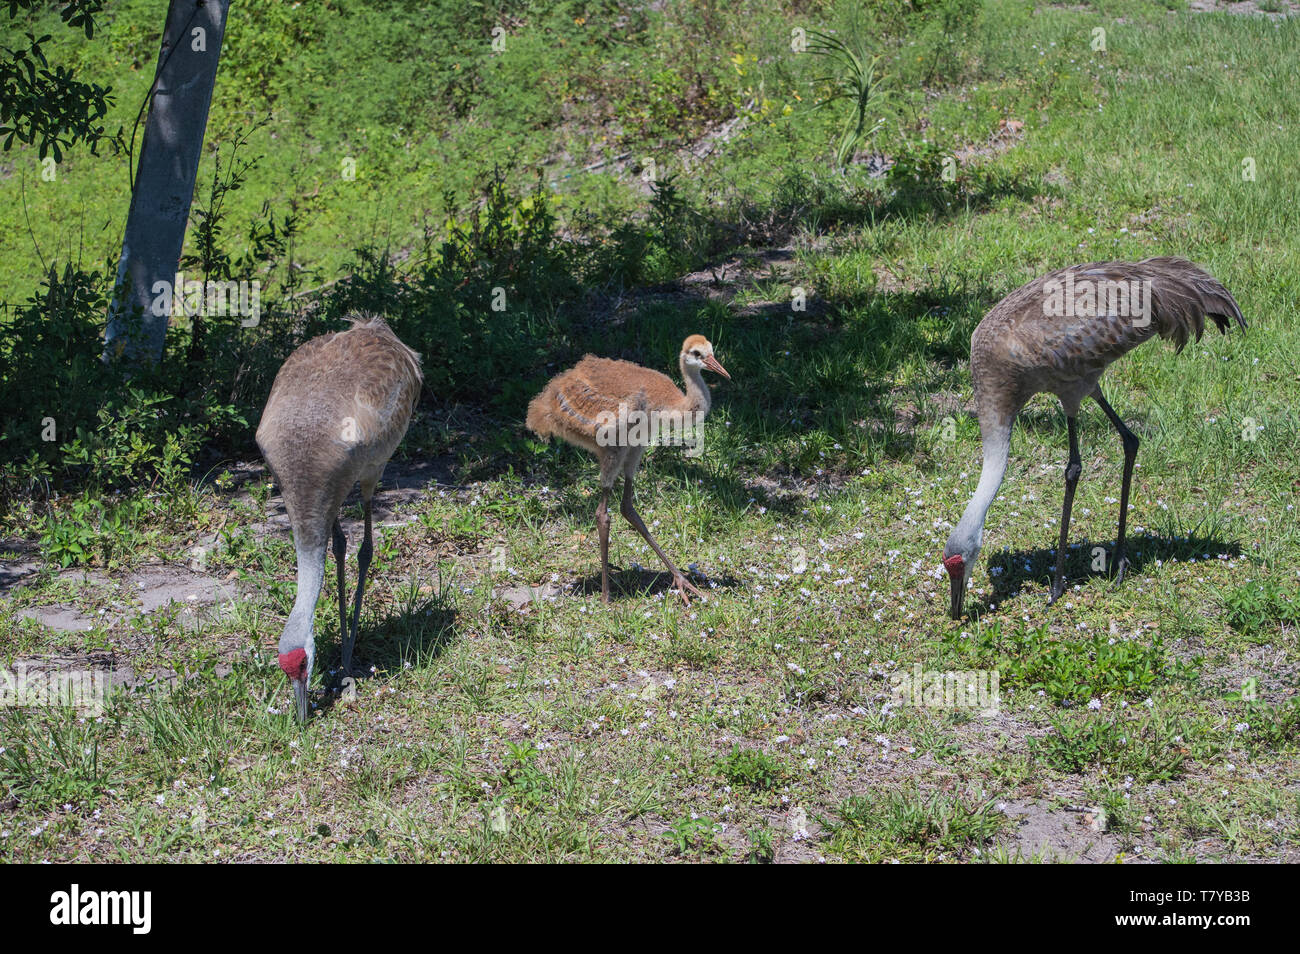 Antigone Canadensis, Florida Sandhill Crane Parents and Juvenile  Large Tall Feathered Animal Birds Long Legs Standing Feeding Foraging Grass Meadow Stock Photo